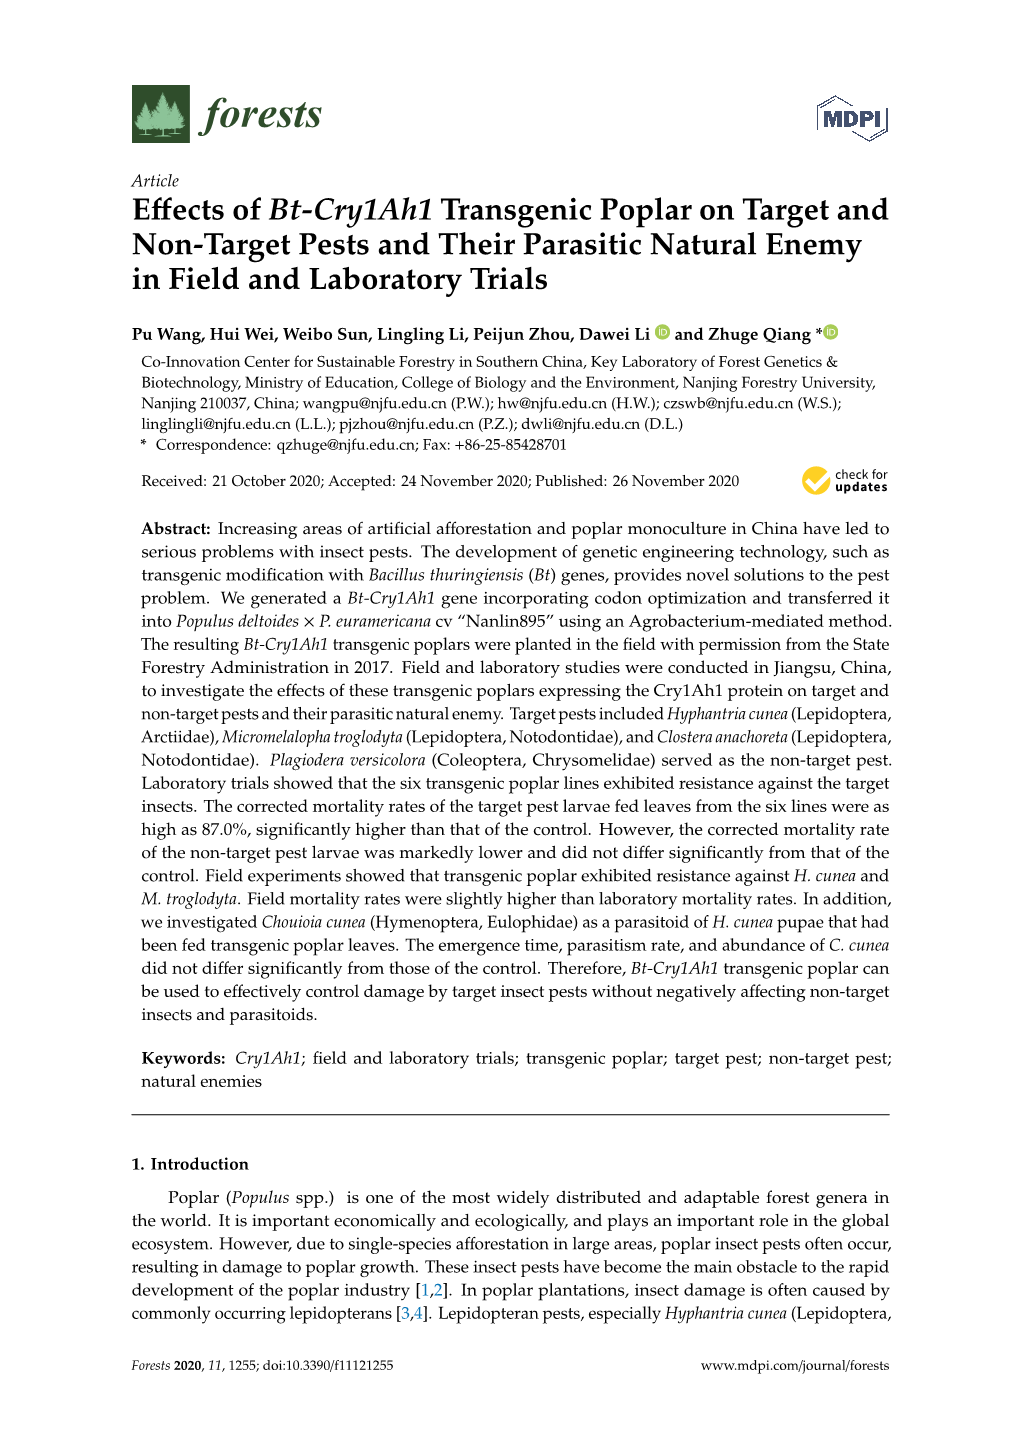 Effects of Bt-Cry1ah1 Transgenic Poplar on Target and Non-Target